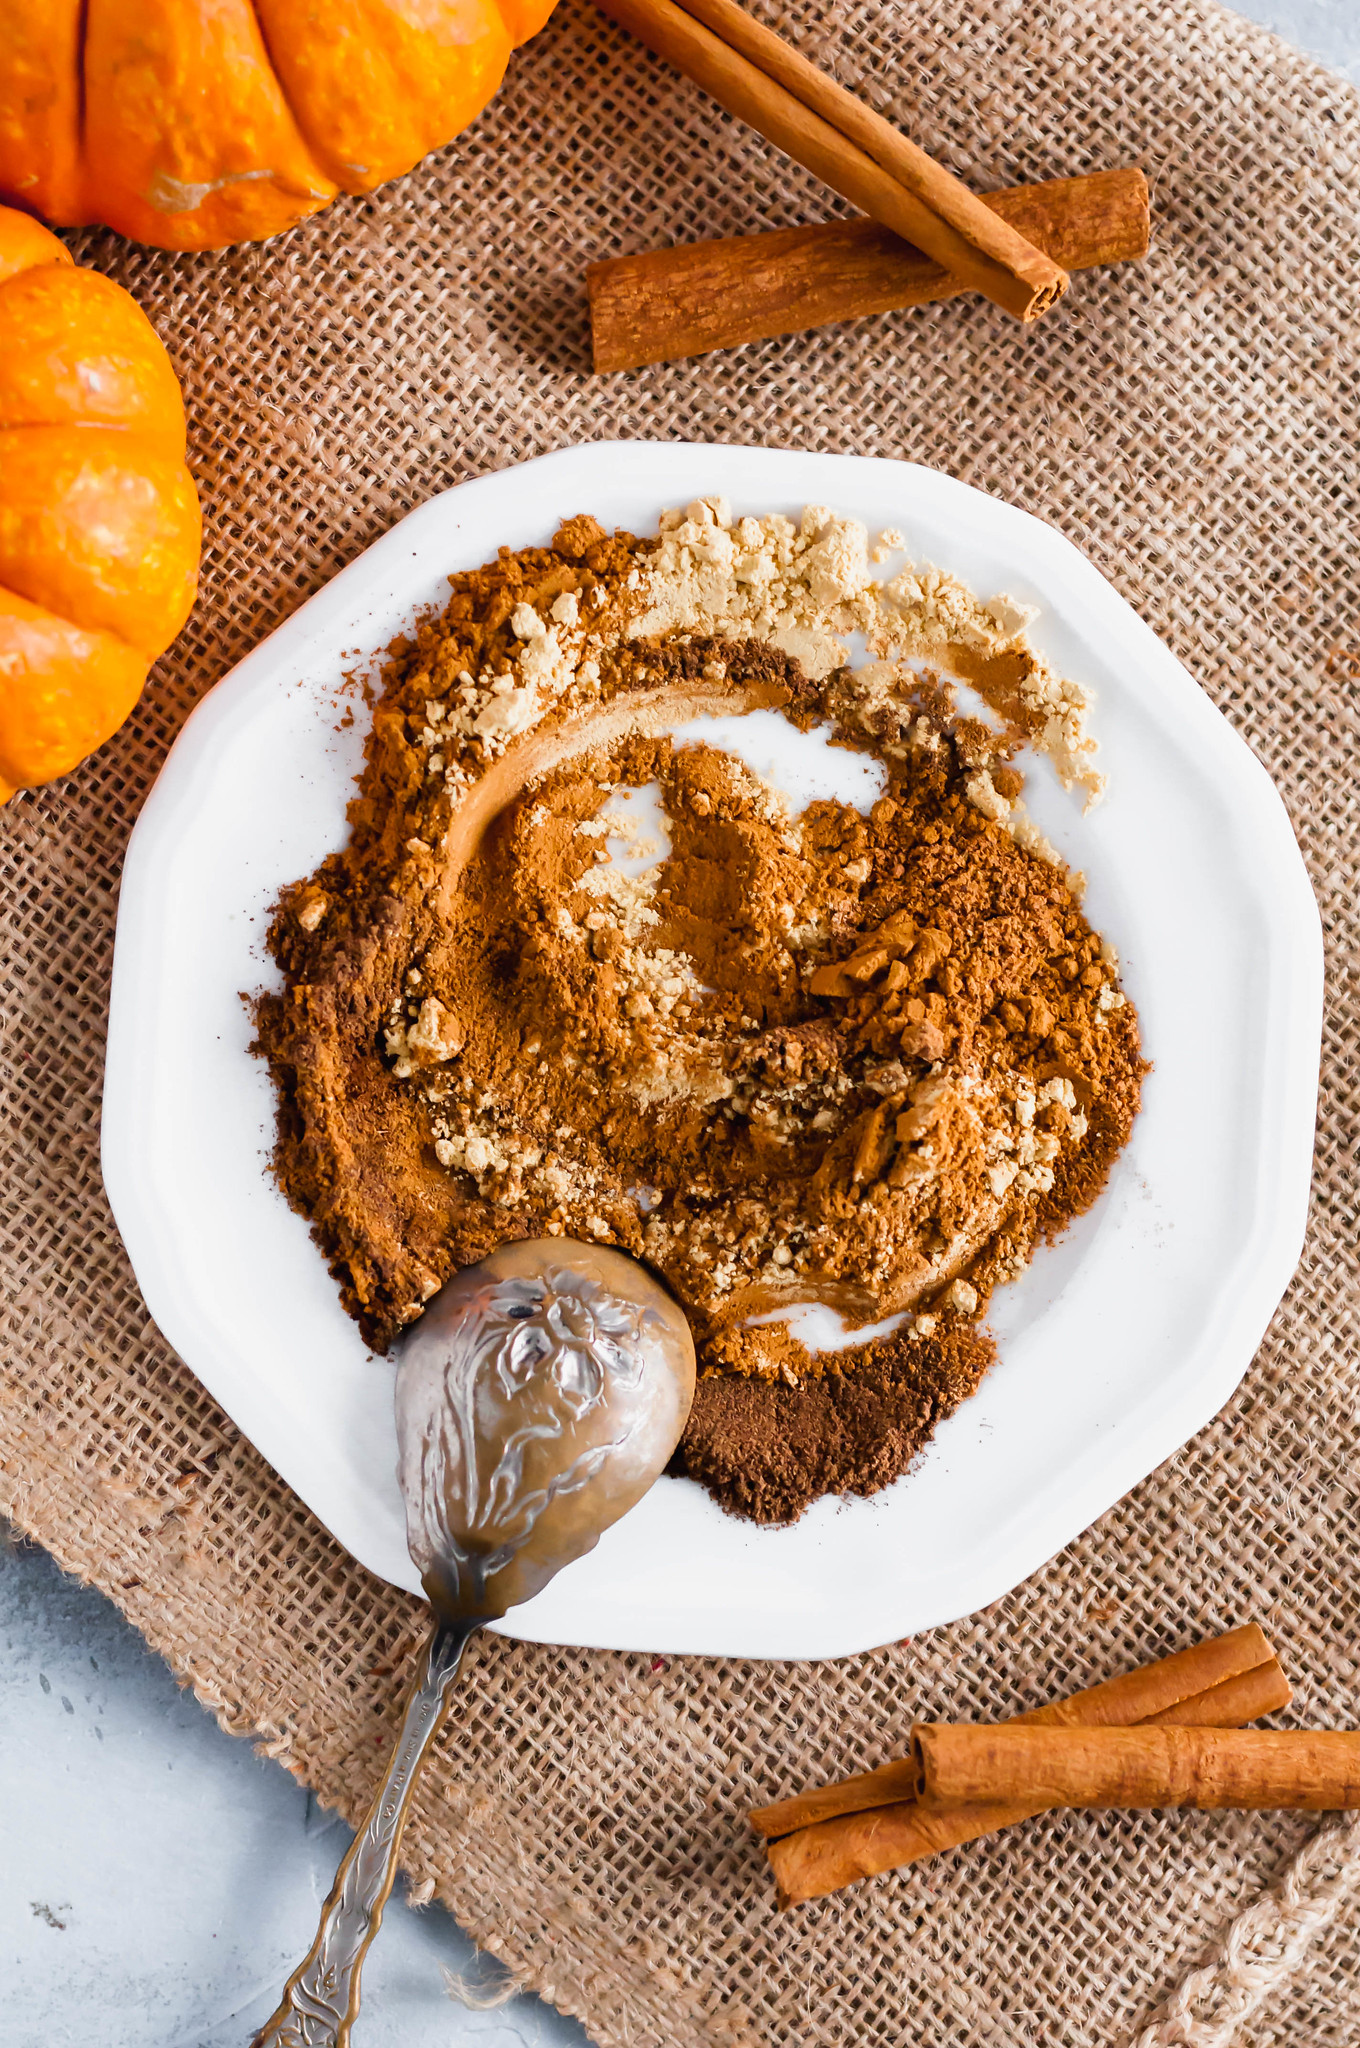 Skip the store-bought mix and make your own Pumpkin Pie Spice recipe at home. It's simple to make with common baking ingredients. 